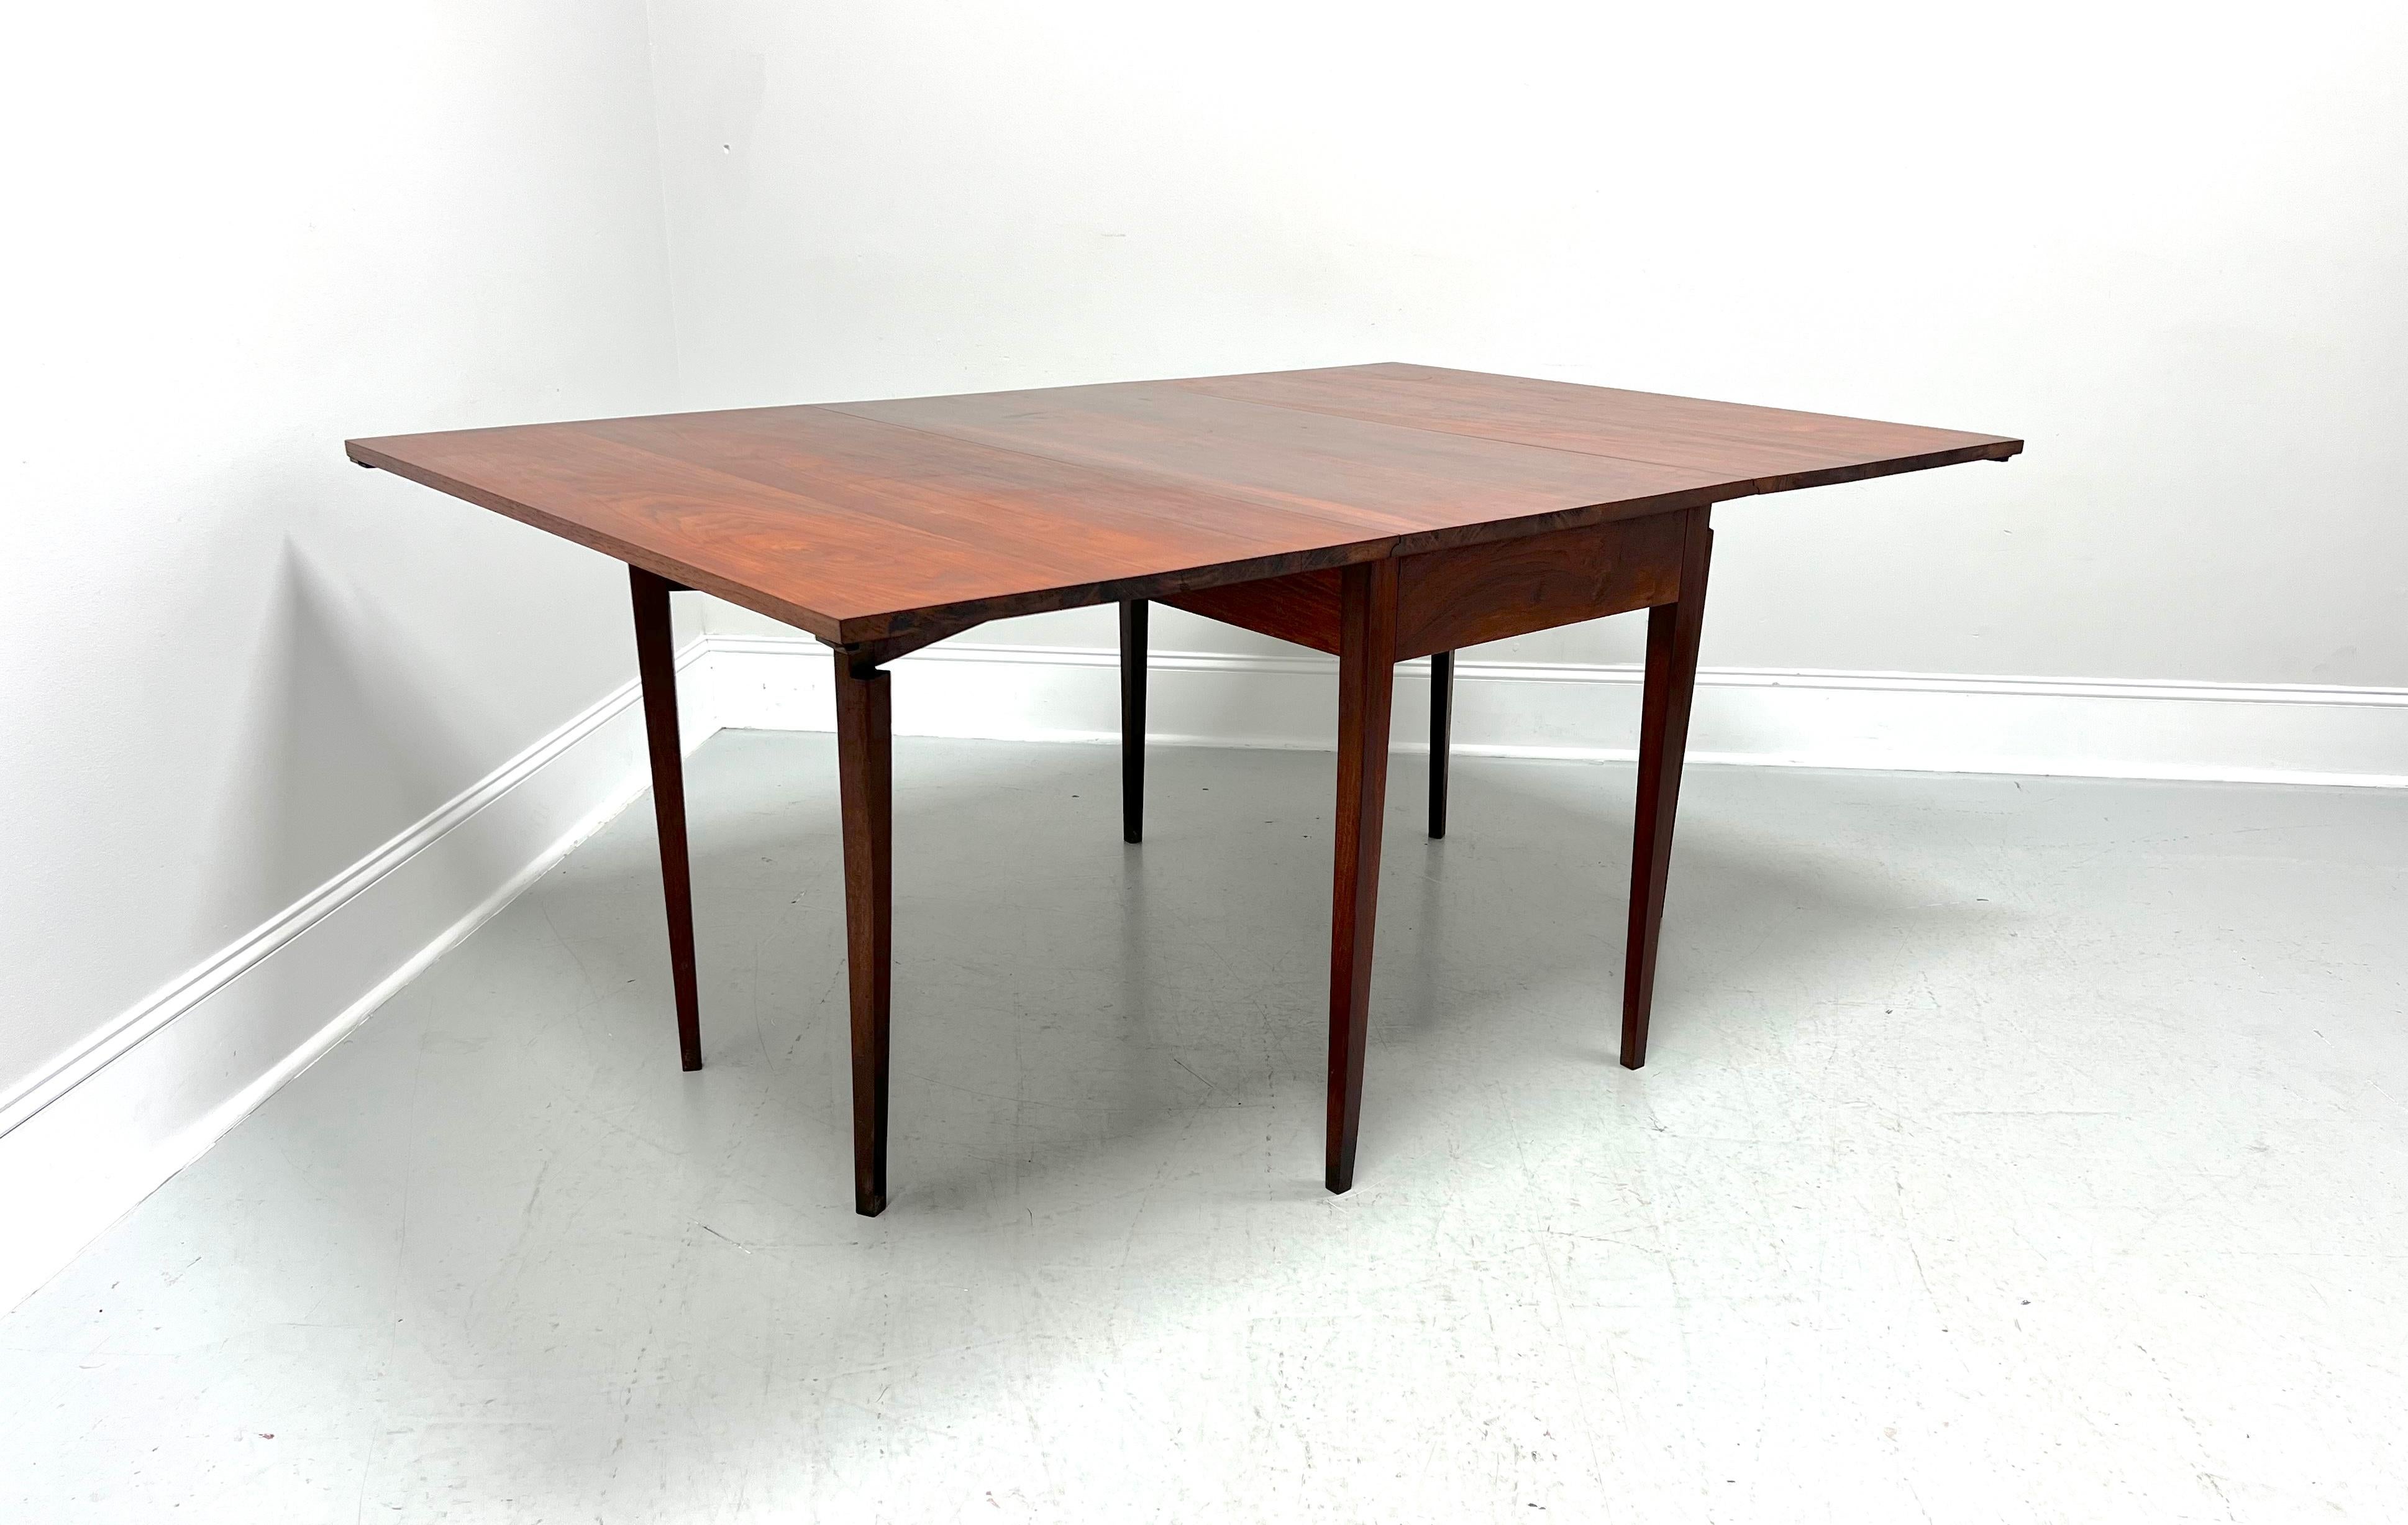 Antique Early 20th Century Walnut Hepplewhite Gateleg Drop-Leaf Dining Table In Good Condition For Sale In Charlotte, NC